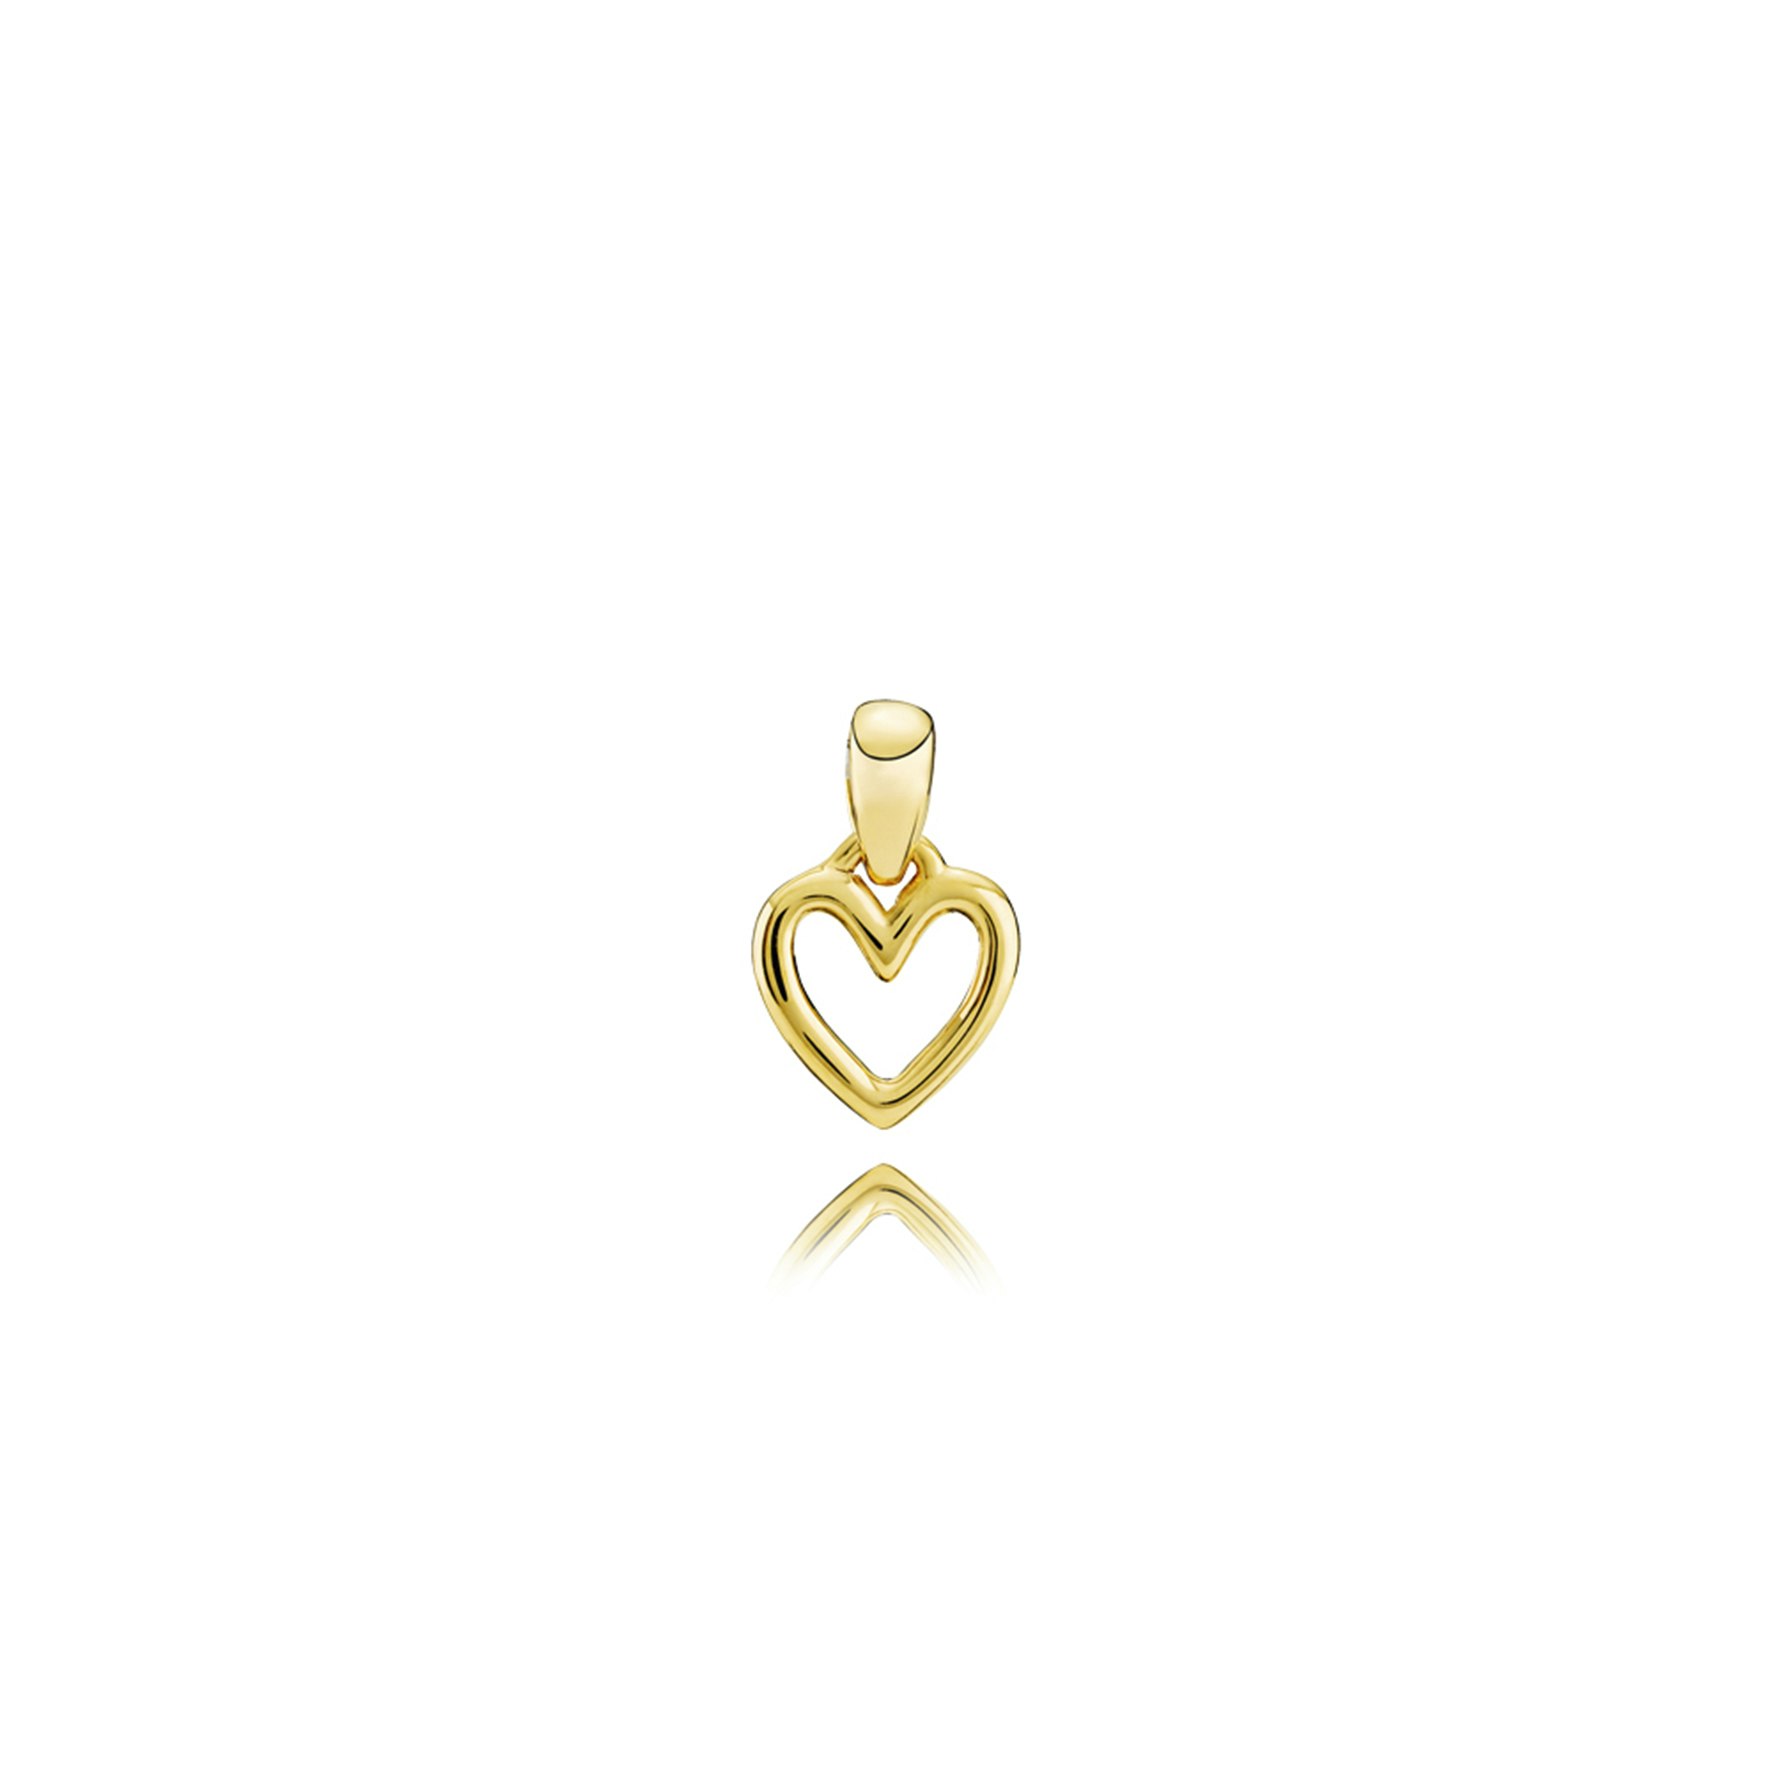 Love Charity Pendant from Izabel Camille in Goldplated Silver Sterling 925